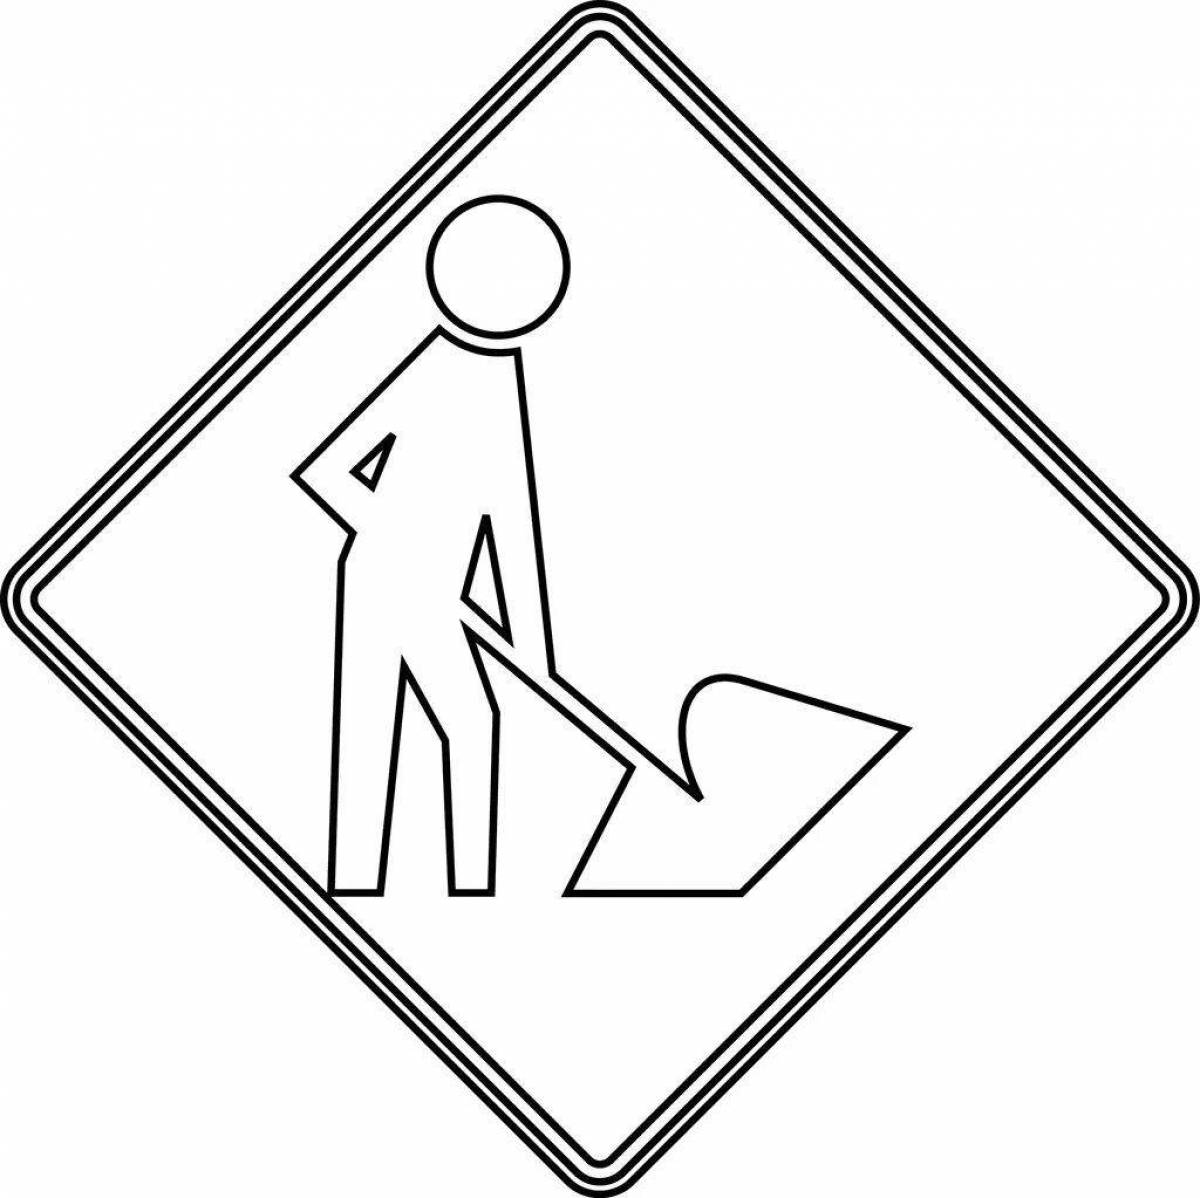 Coloring page attractive overpass sign